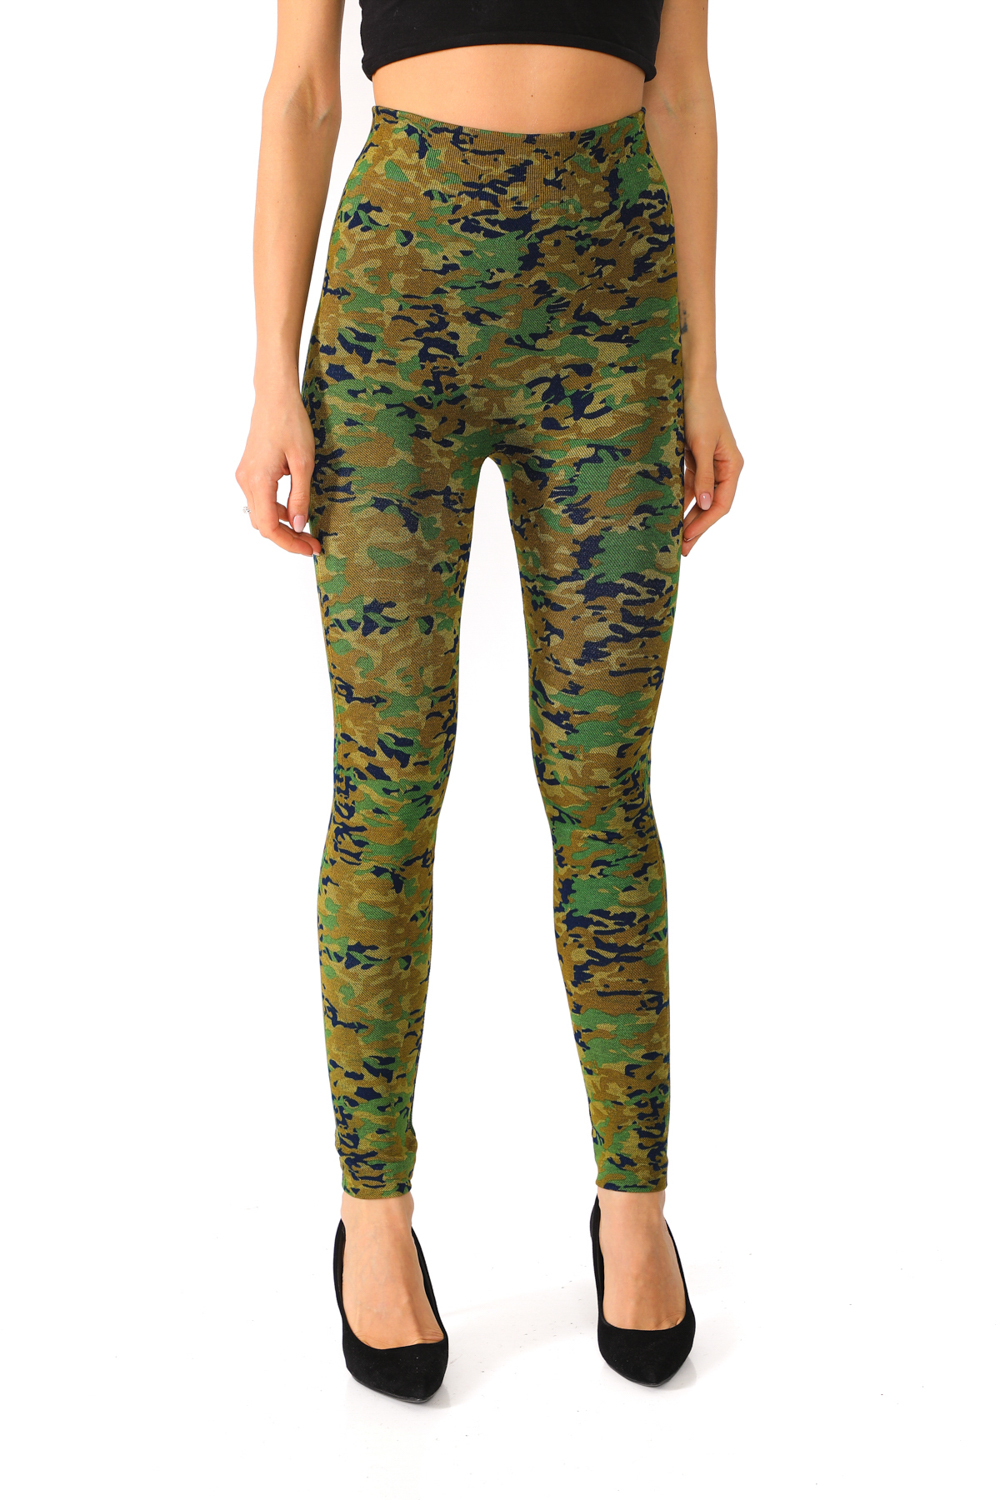 Denim Leggings with Olive Color Camo Pattern - 5